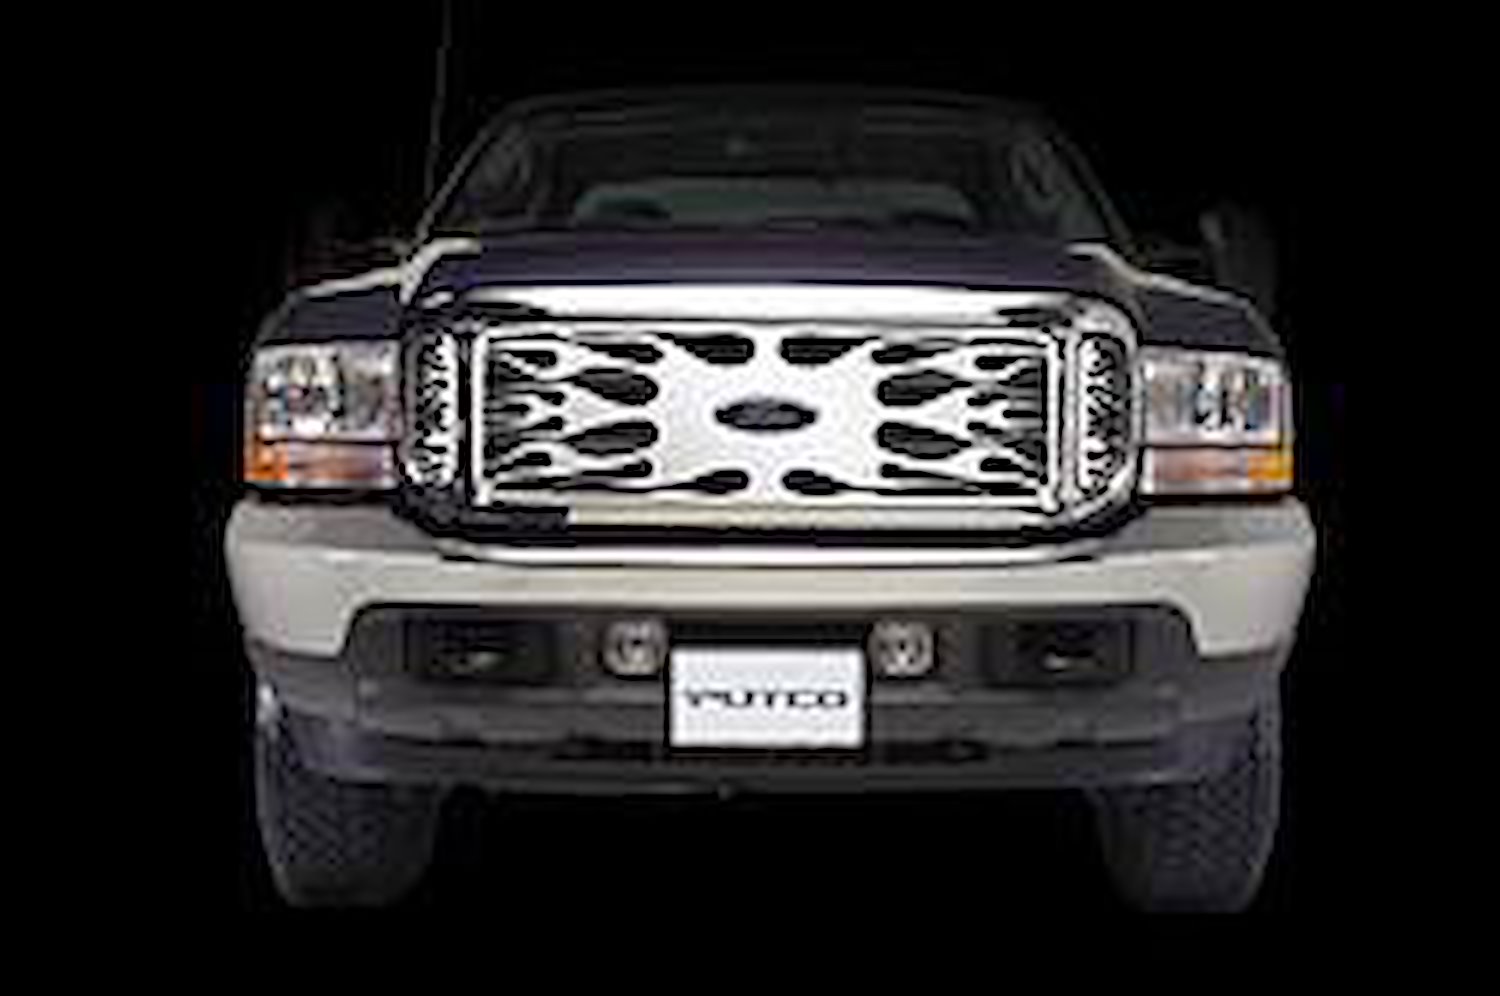 Ford Super Duty w/ logo cutout (includes side vents)